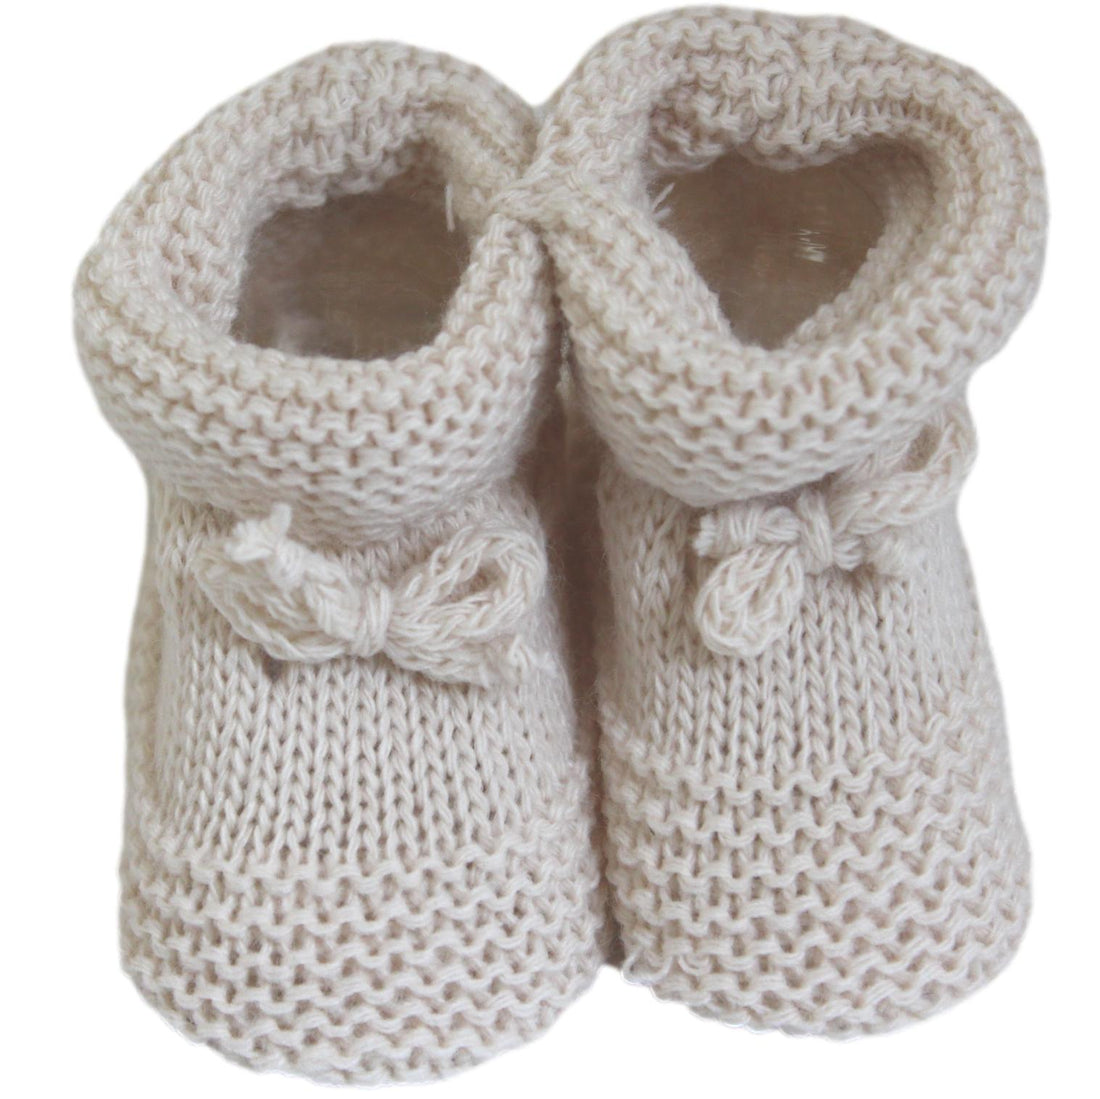 Biscuit Unisex Baby Booties with a Tie Finish